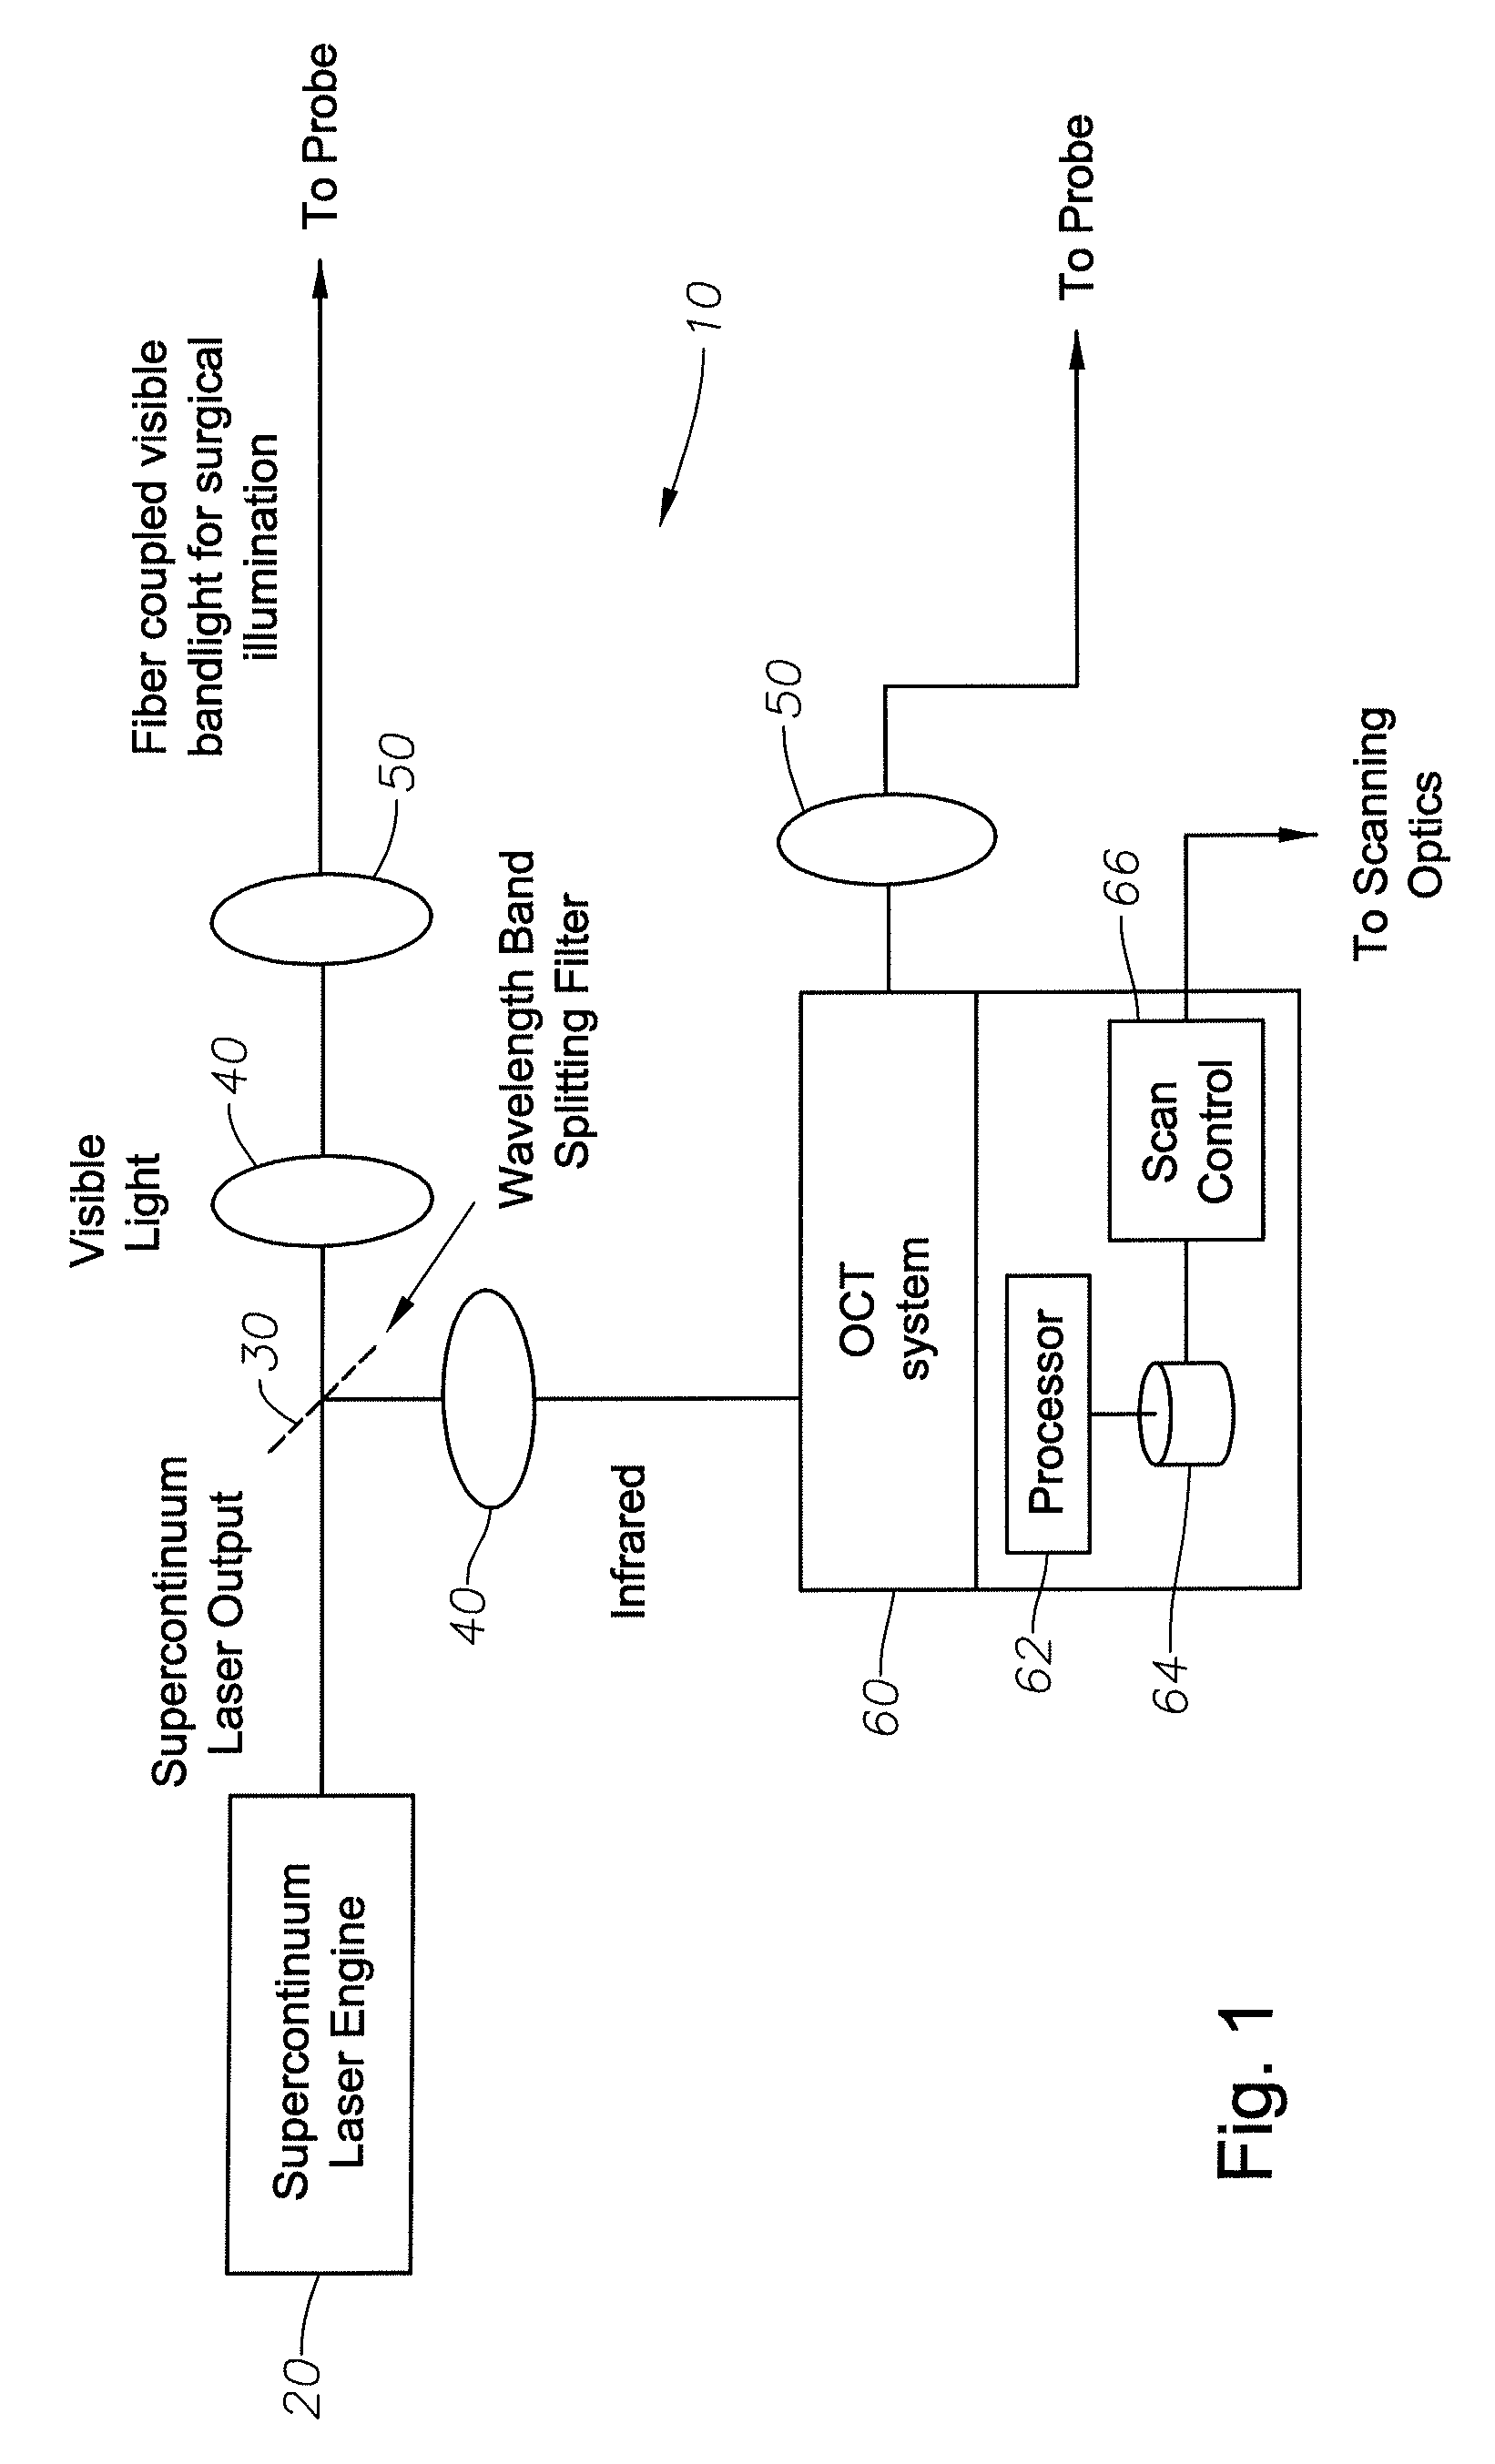 Optical coherence tomography and illumination using common light source